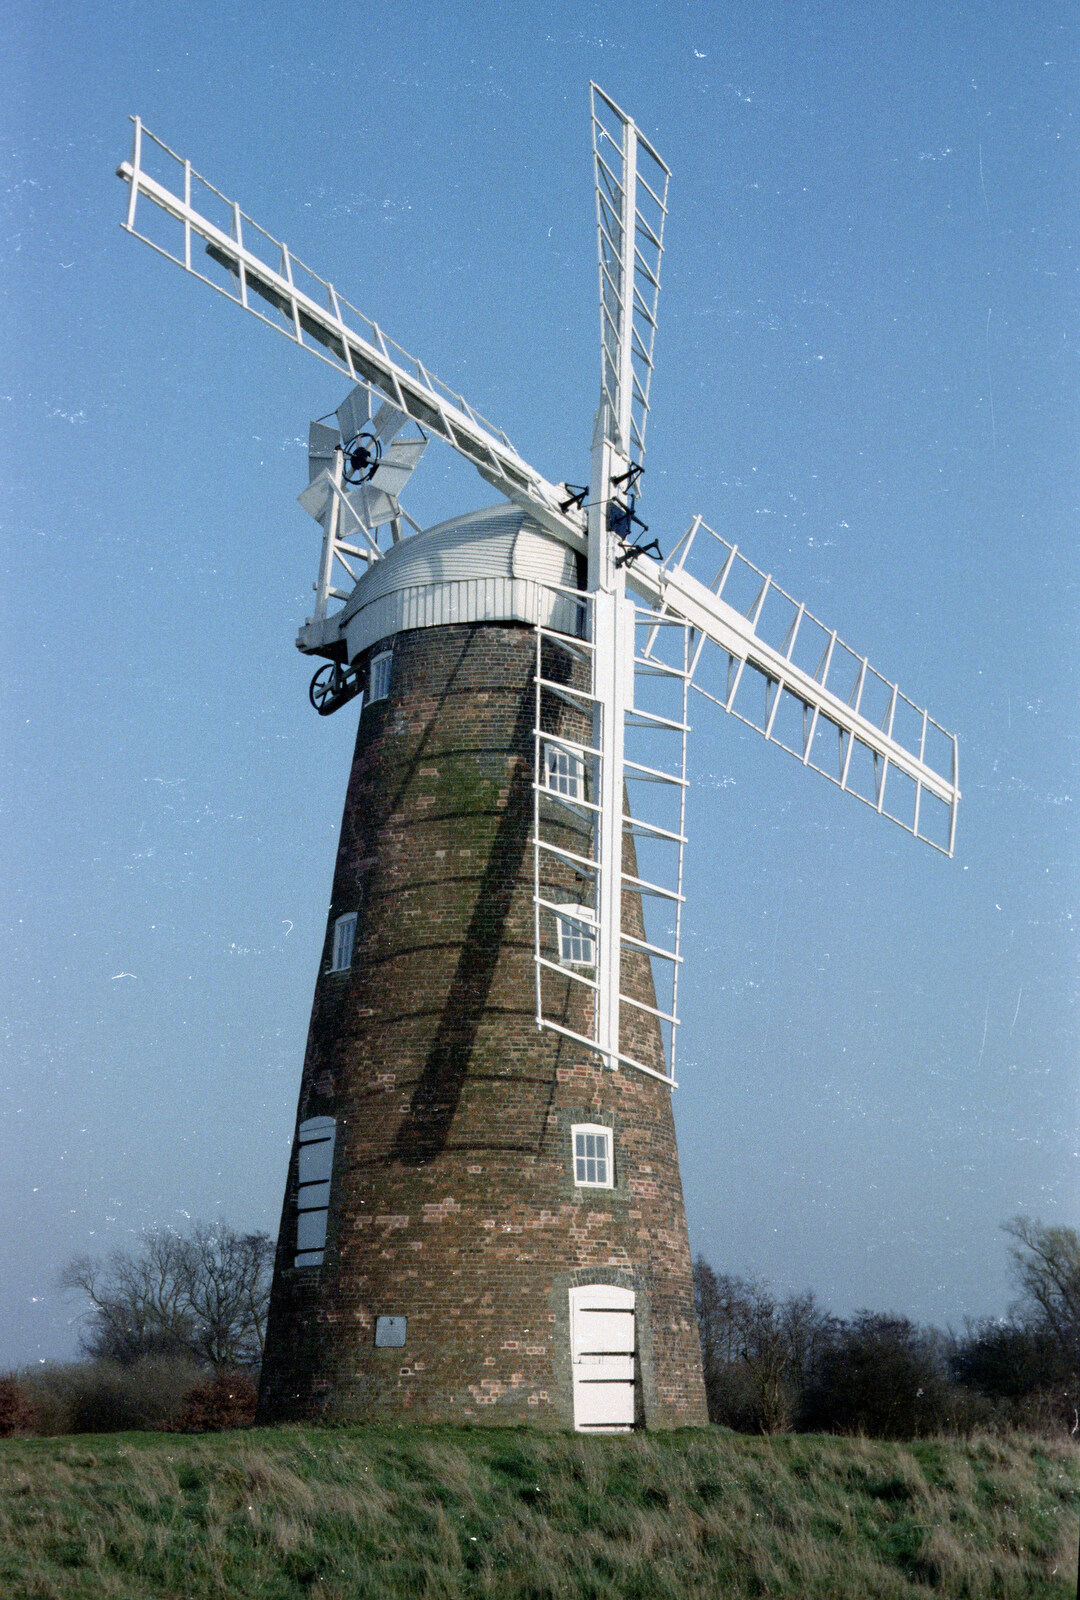 Billingford Windmill from Pedros and Daffodils, Norwich and Billingford, Norfolk - 20th April 1991